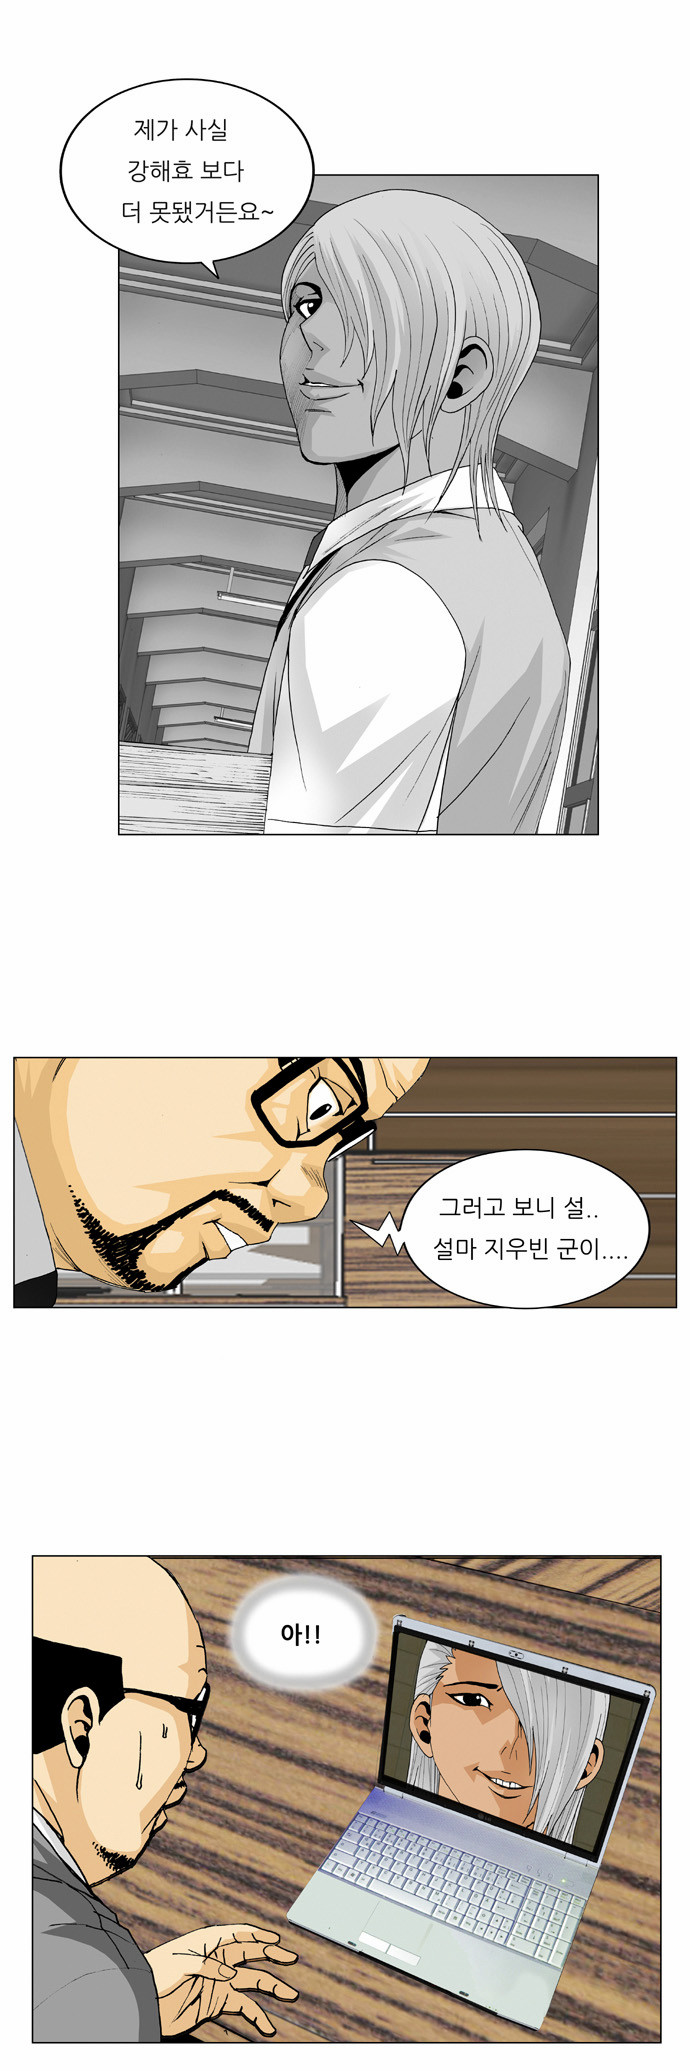 Ultimate Legend - Kang Hae Hyo - Chapter 50 - Page 4